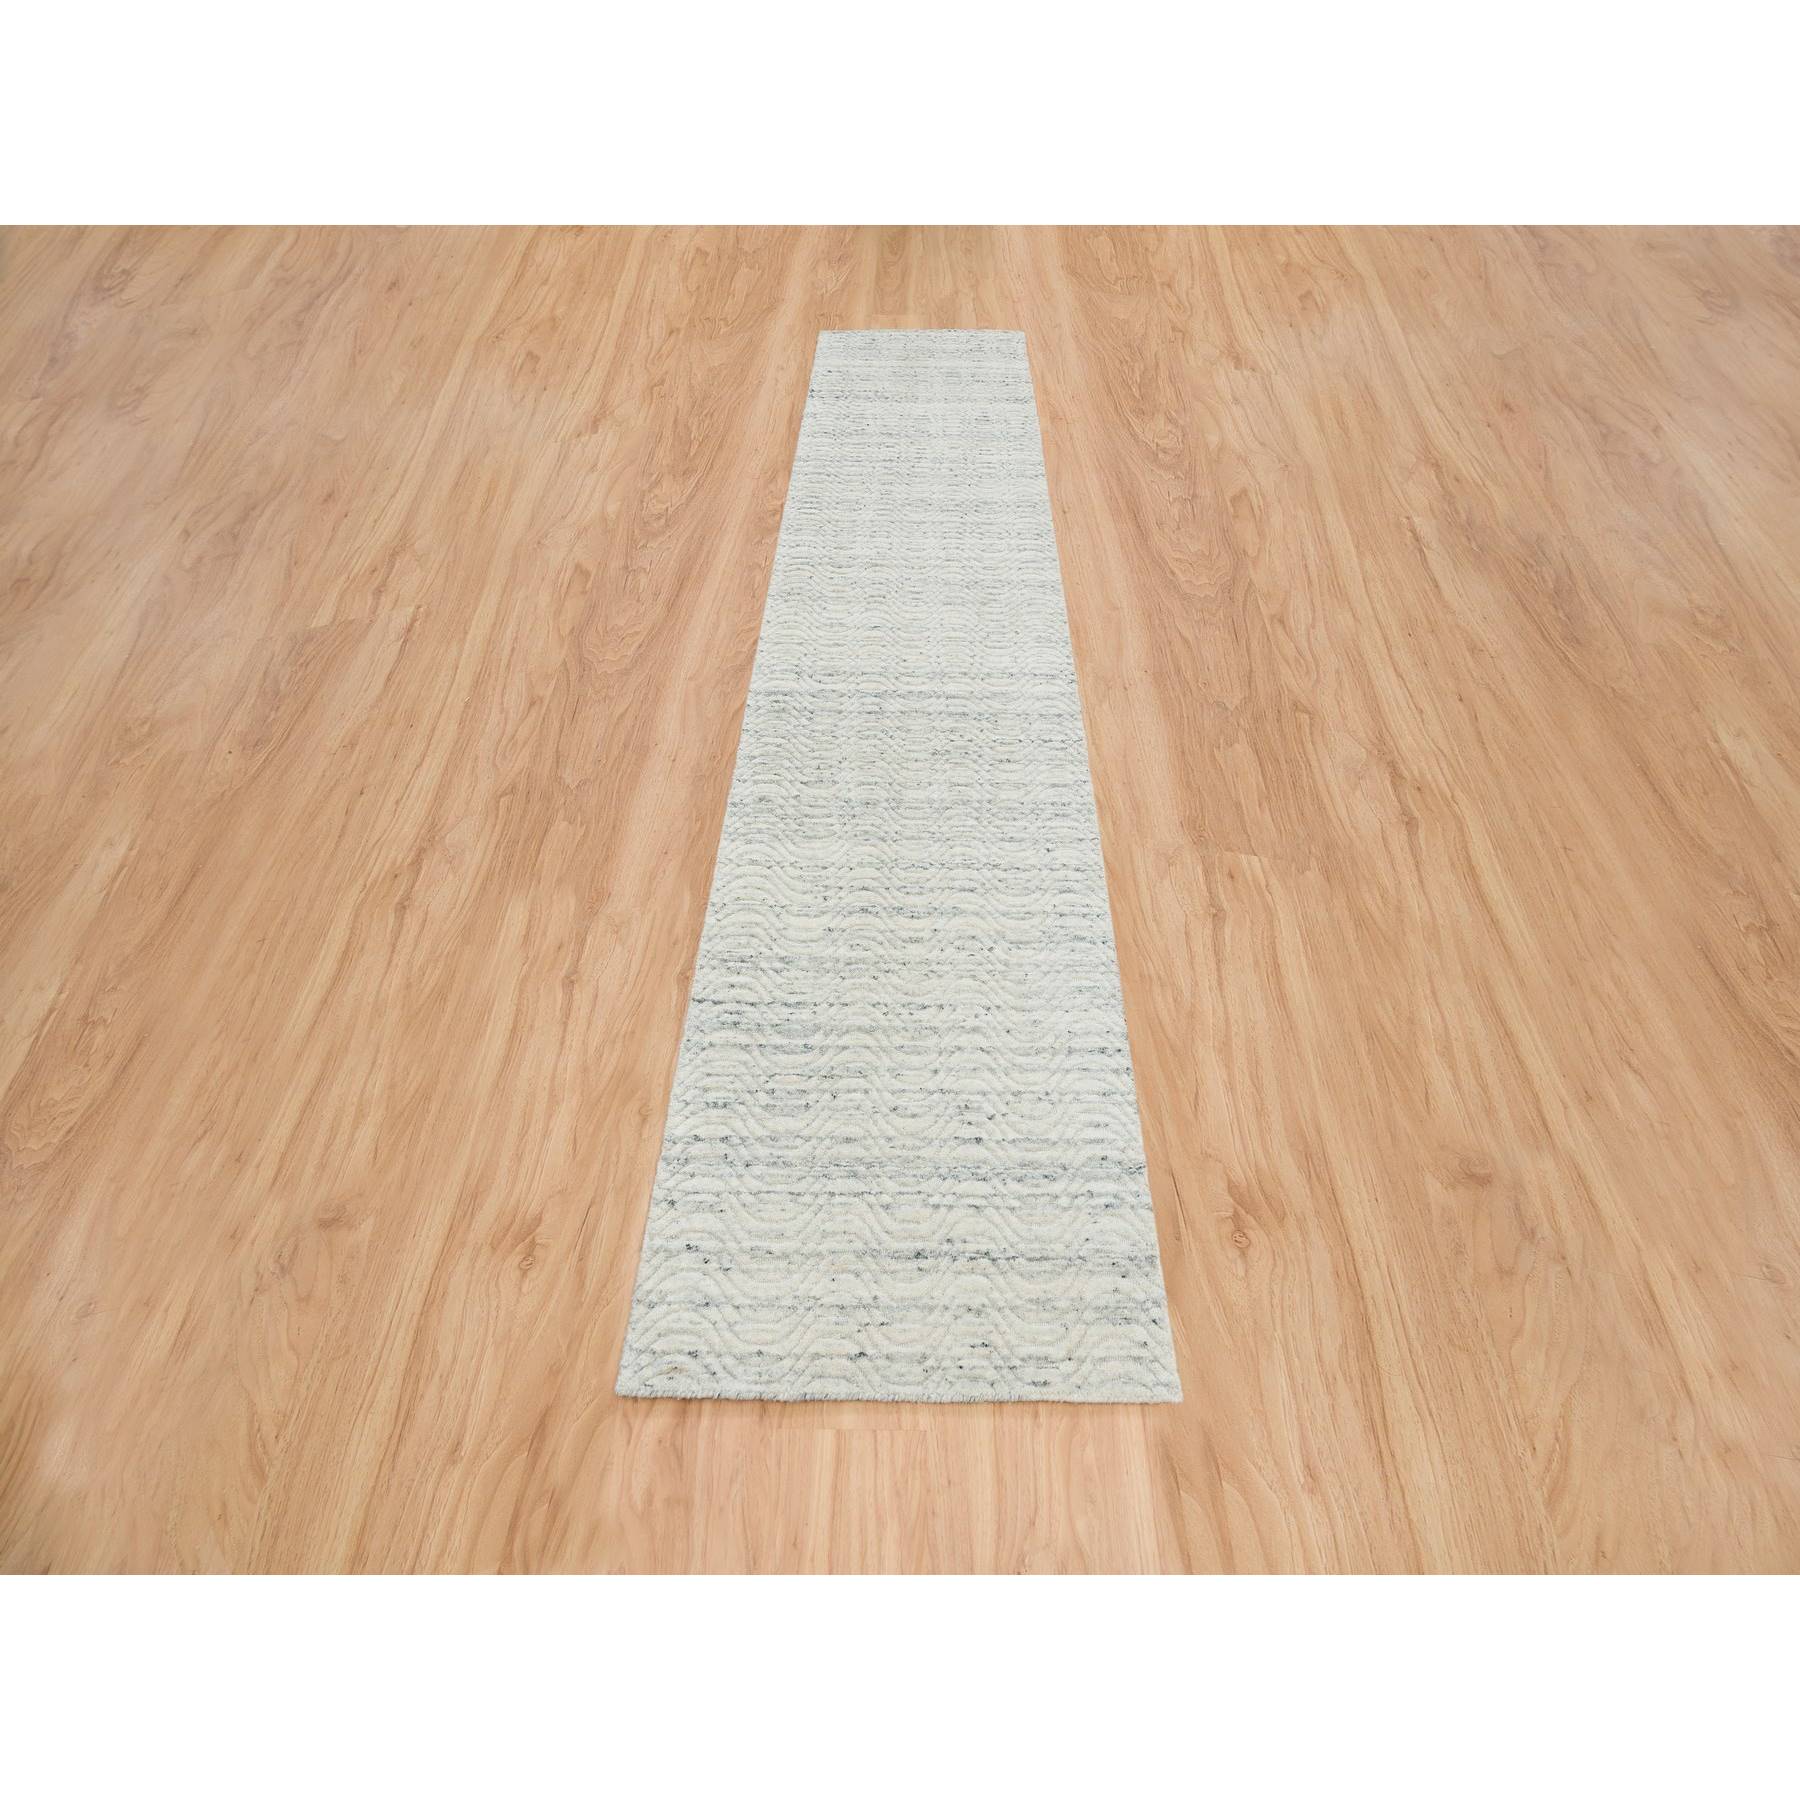 Modern-and-Contemporary-Hand-Loomed-Rug-325205